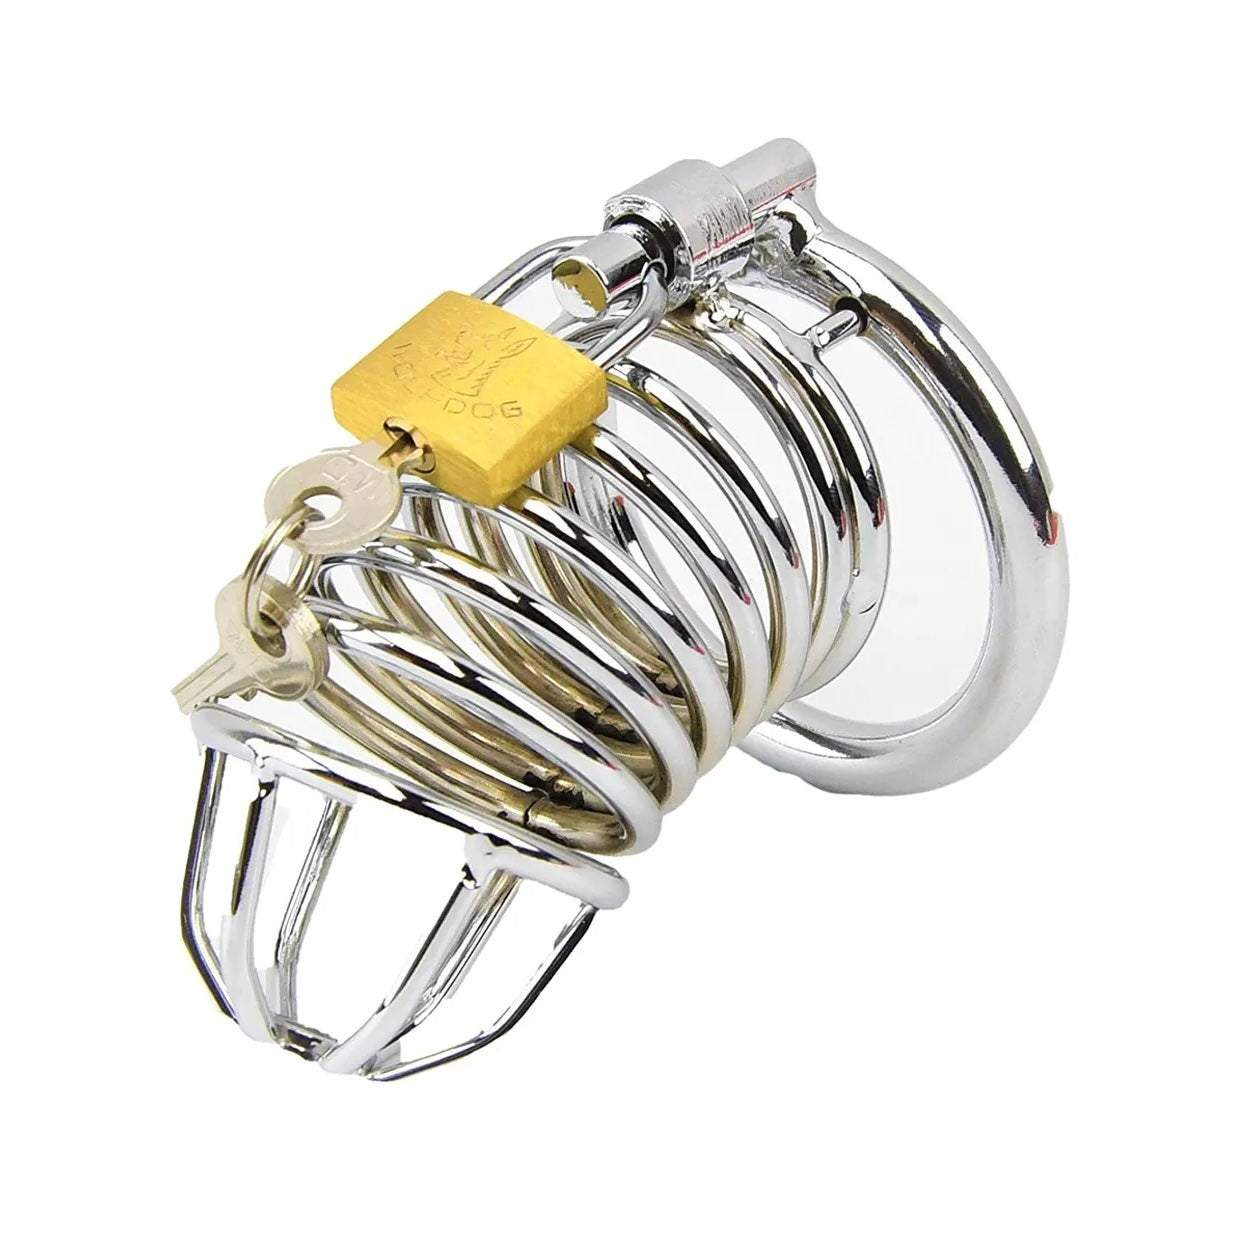 Chrome Chastity Cock Cage